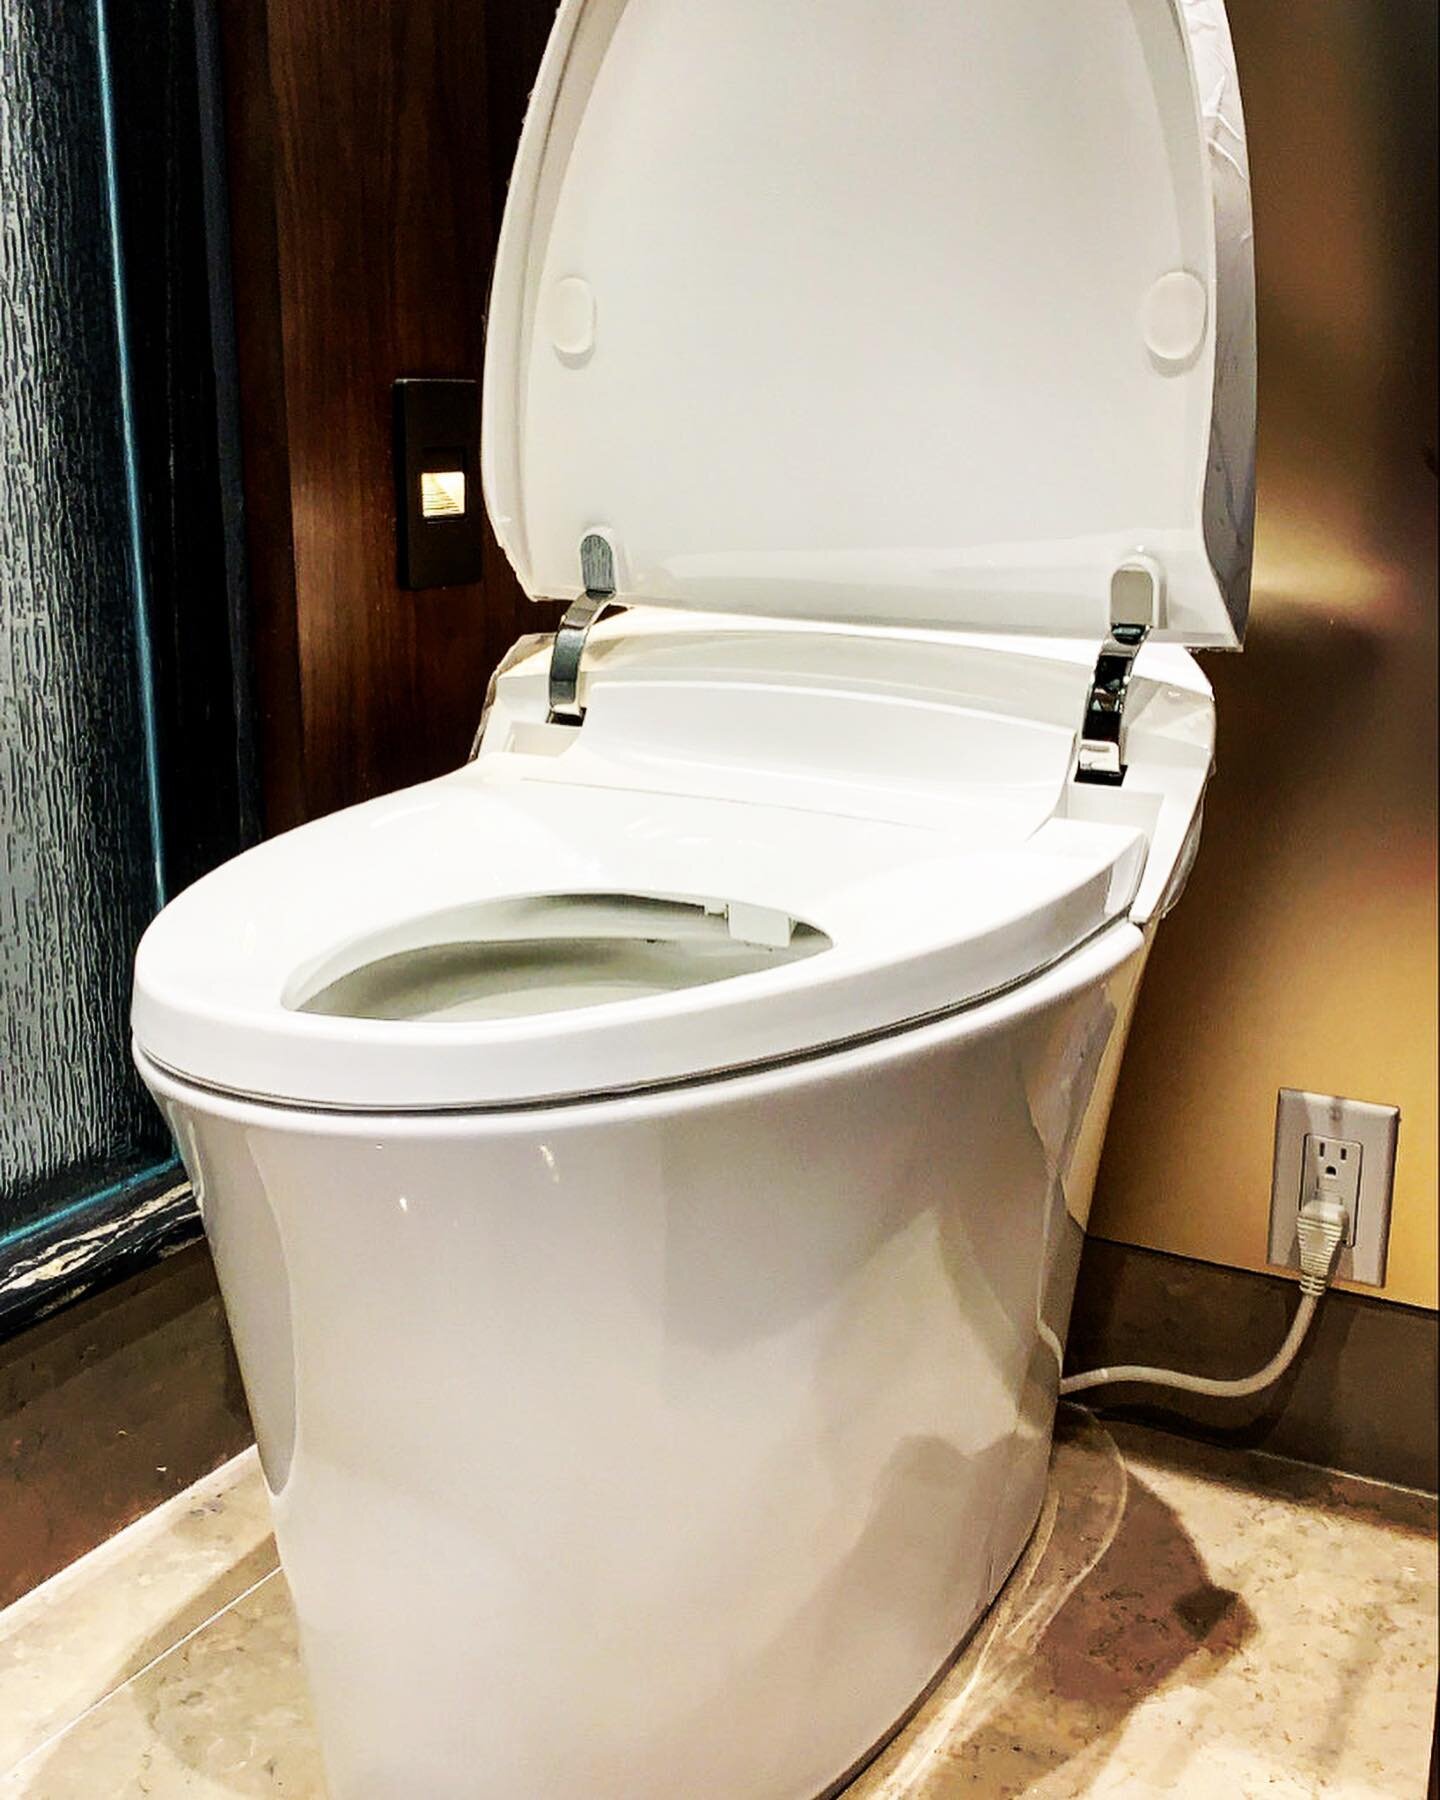 Sophistication in the simplicity of design.  @kohler

One of our recent works we&rsquo;ve completed in the intelligent bathroom for our clients condominium.  This veil intelligent toilet is paired with a DTV intelligent shower which includes the new 